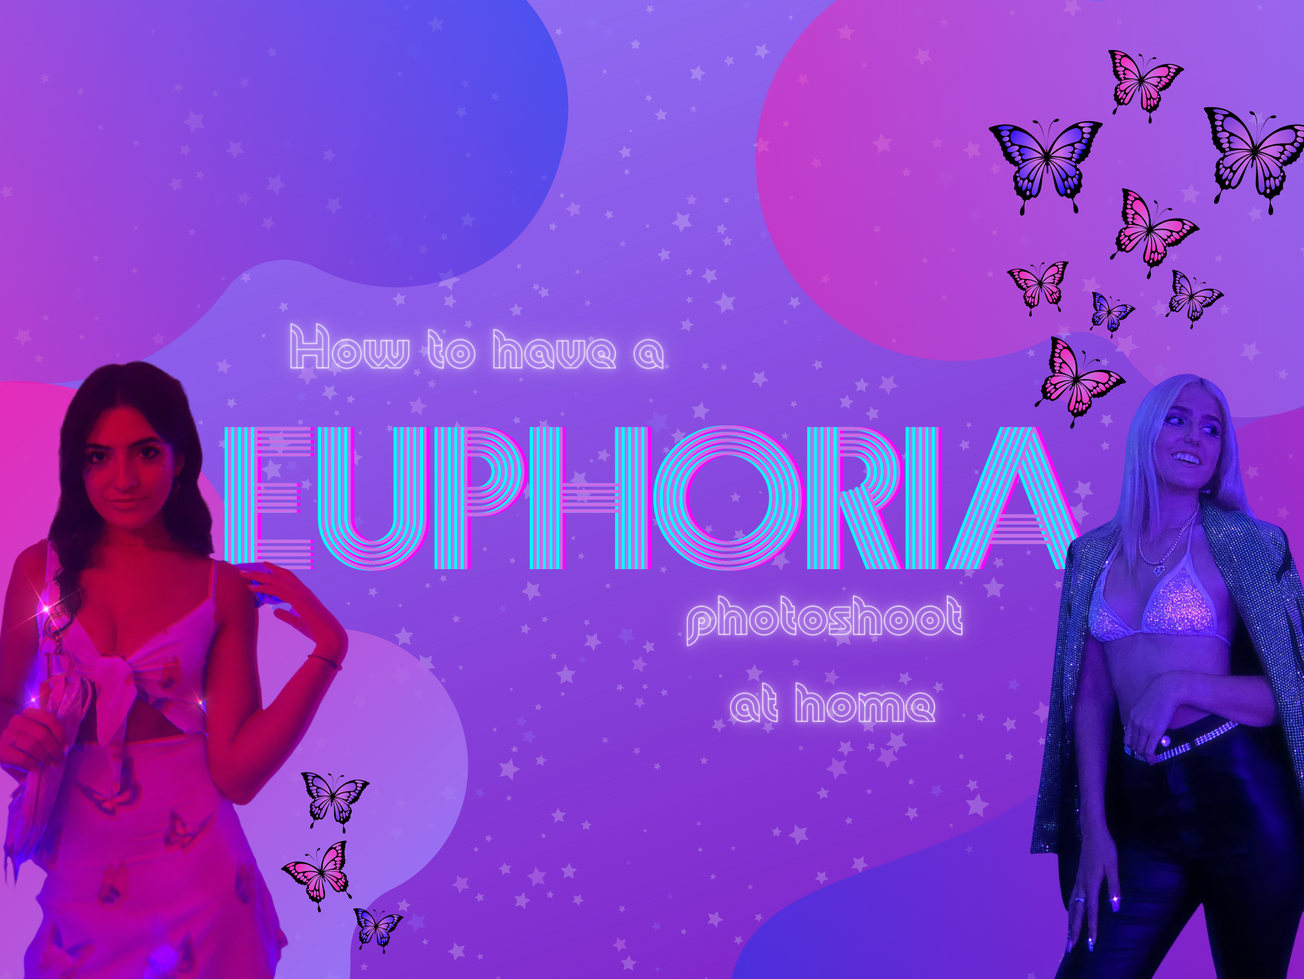 7 Outfits Inspired by 'Euphoria' Characters